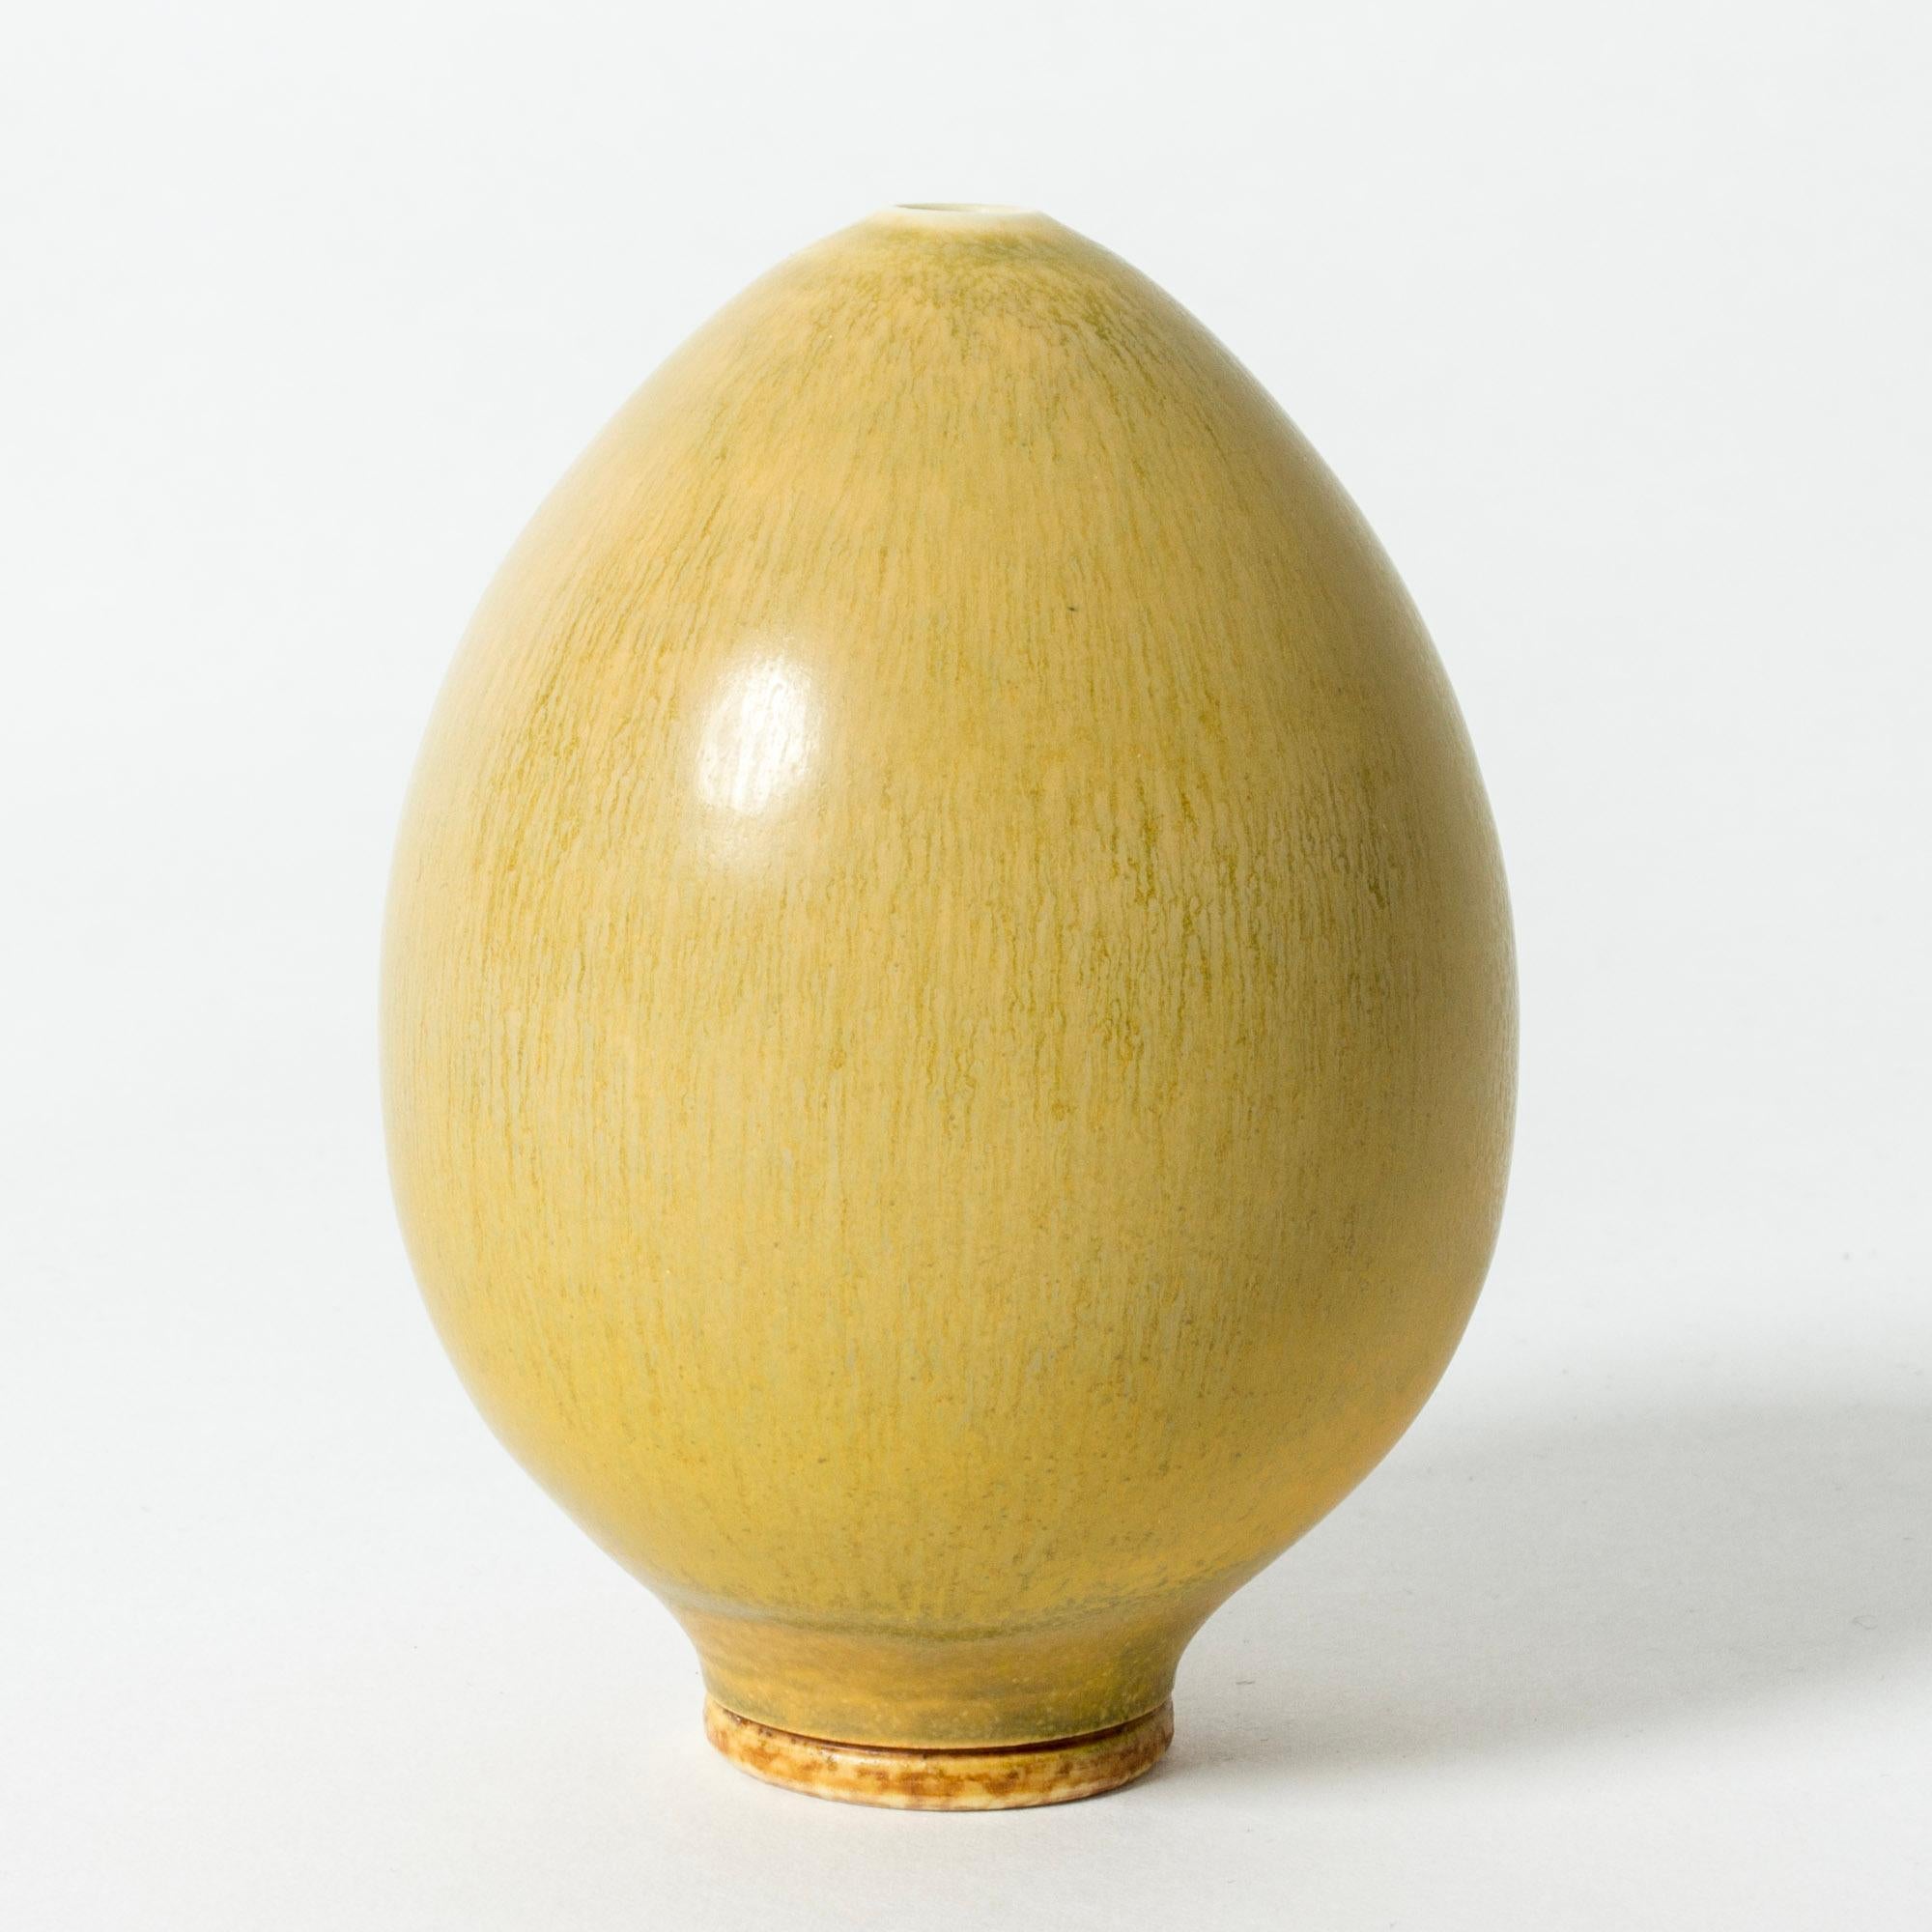 Lovely, small stoneware vase by Berndt Friberg, in the form of a slim egg. Delicately made, with yellow hare’s fur glaze.

Berndt Friberg was a Swedish ceramicist, renowned for his stoneware vases and vessels for Gustavsberg. His pure, composed